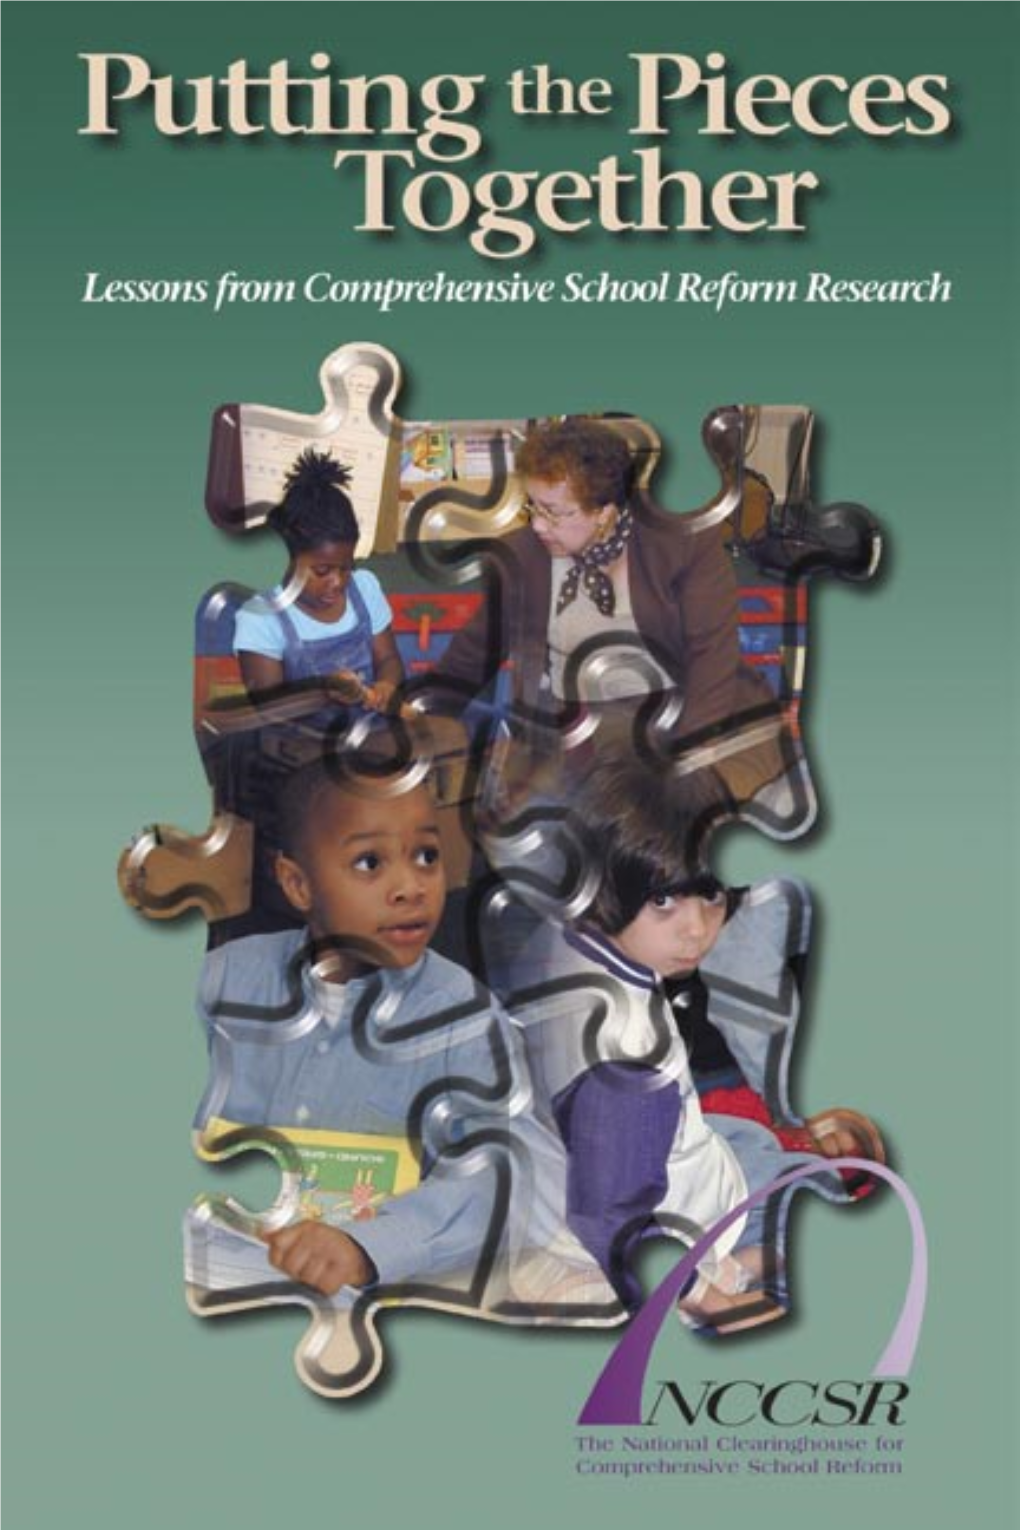 Lessons from Comprehensive School Reform Research